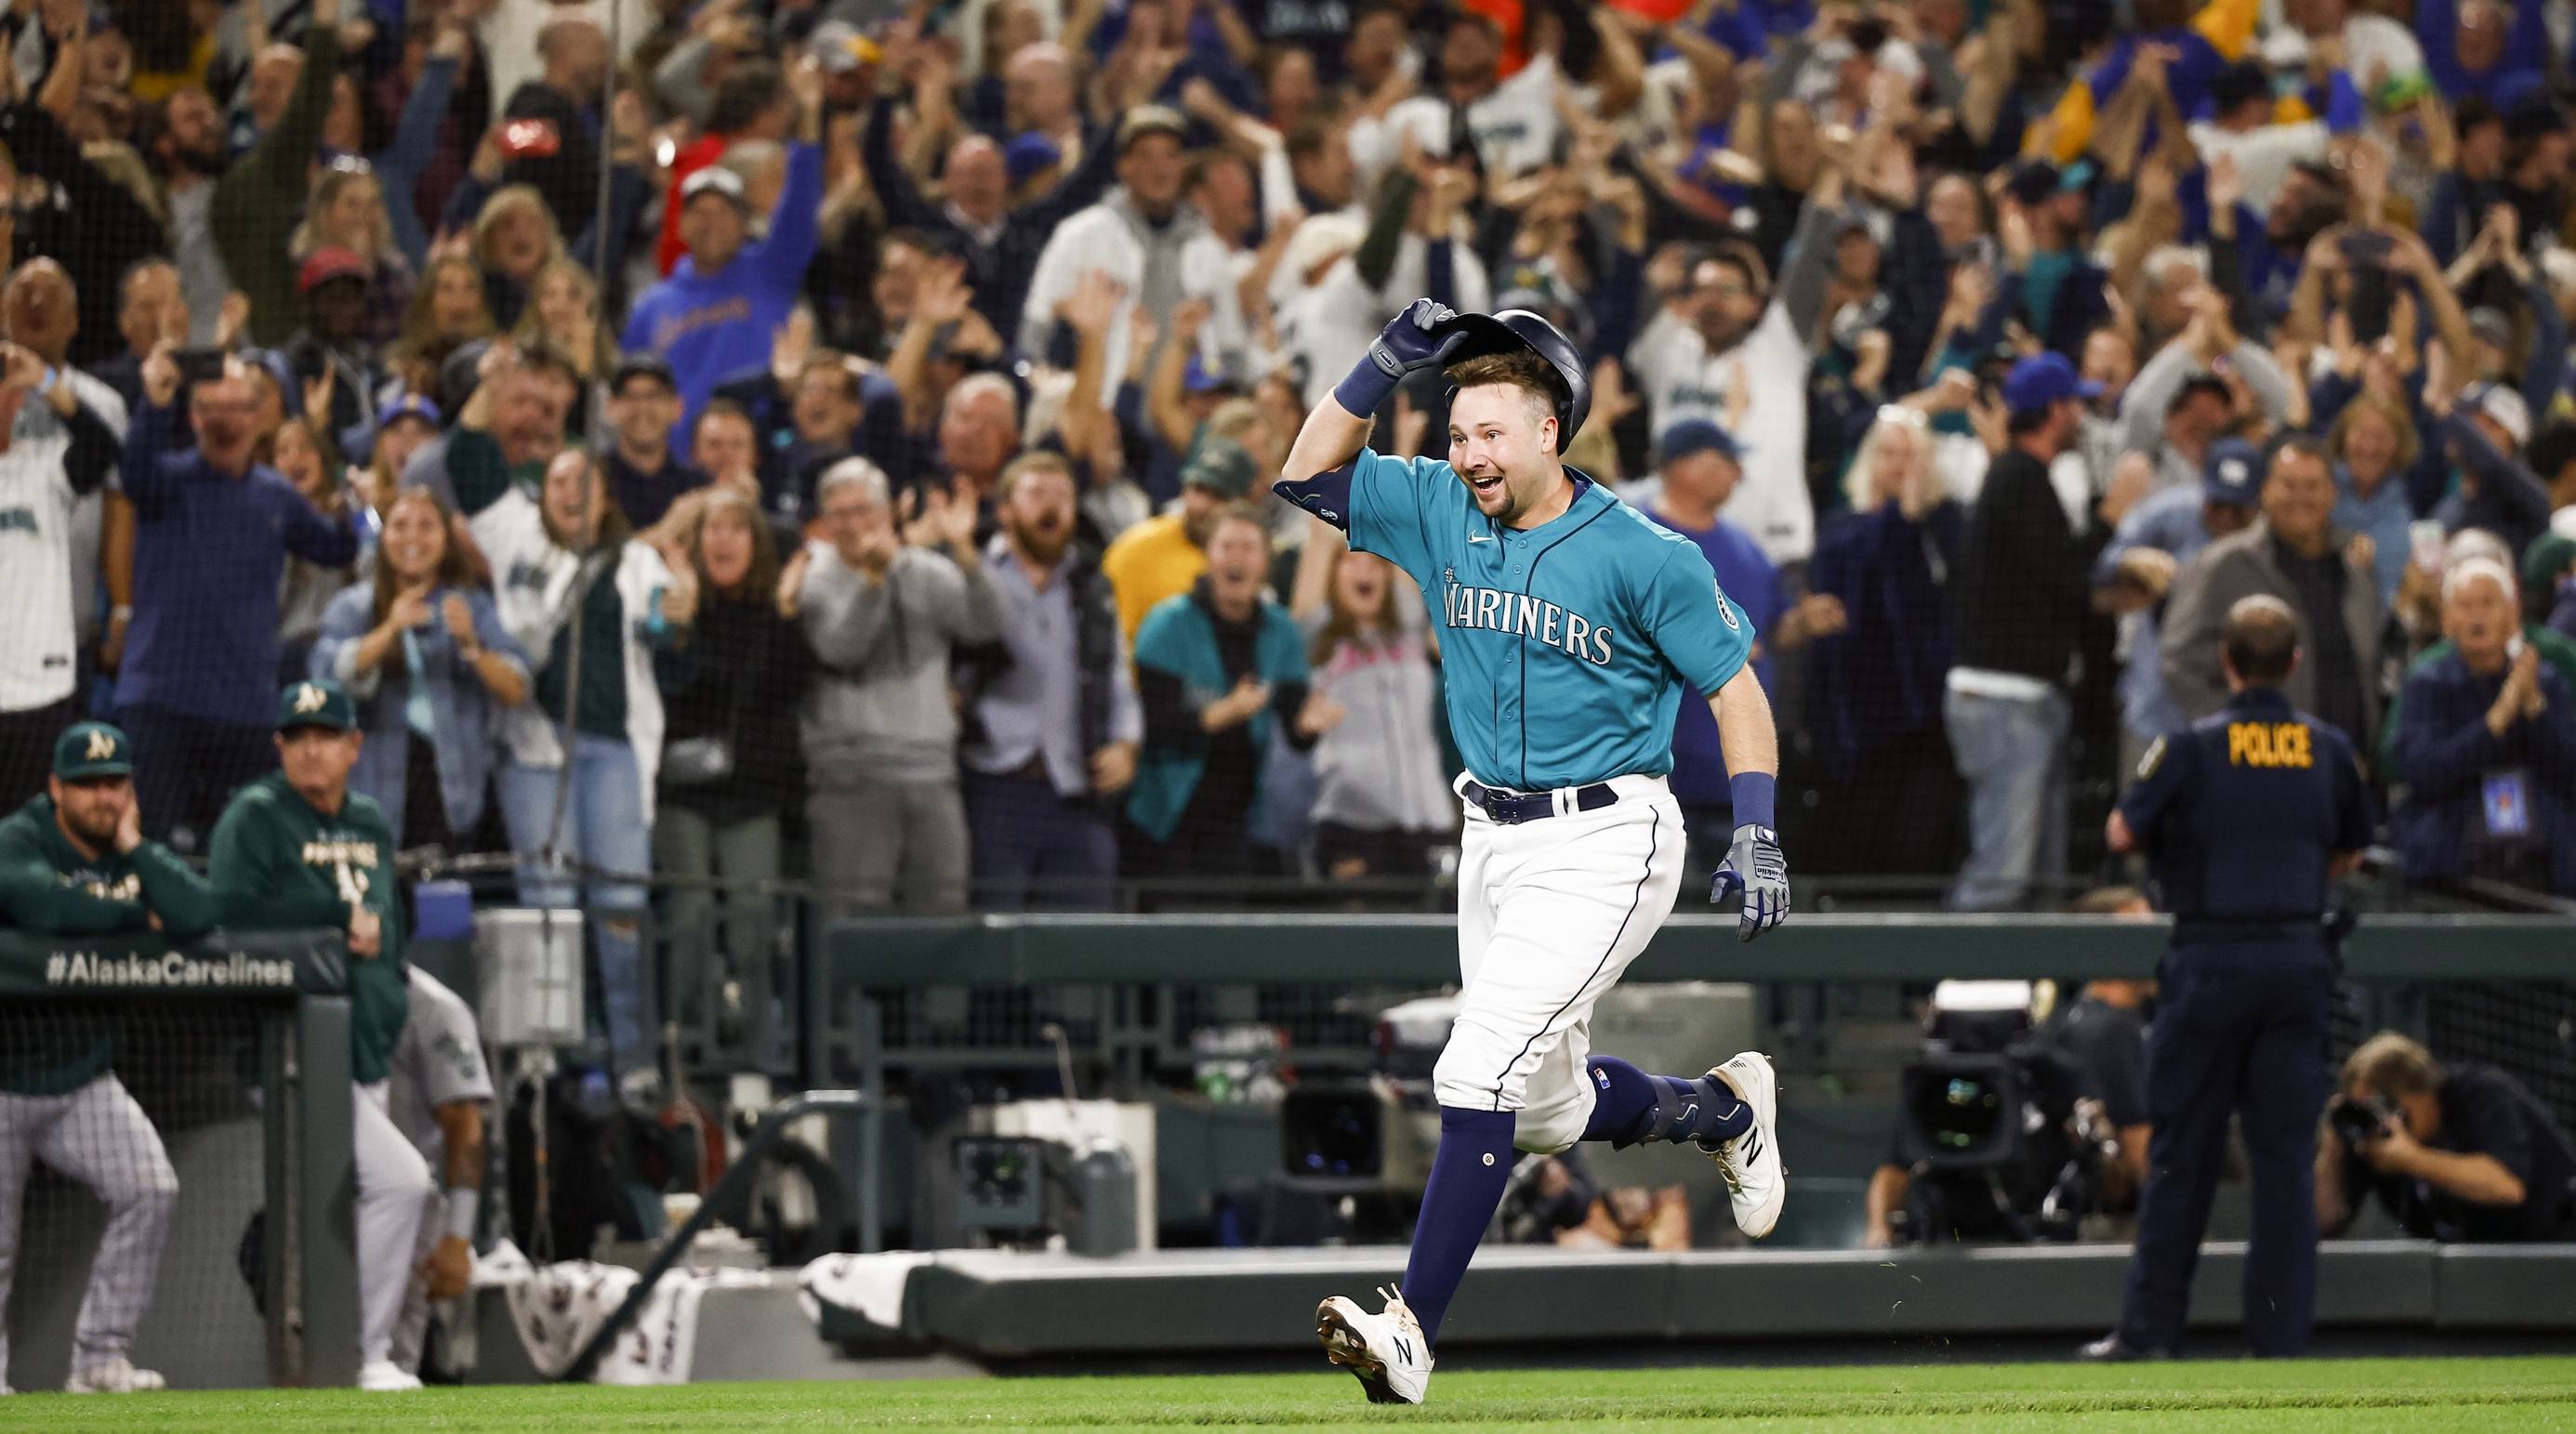 2022 Key Mariners Moments: Cal Raleigh's Walk Off A.K.A. Big